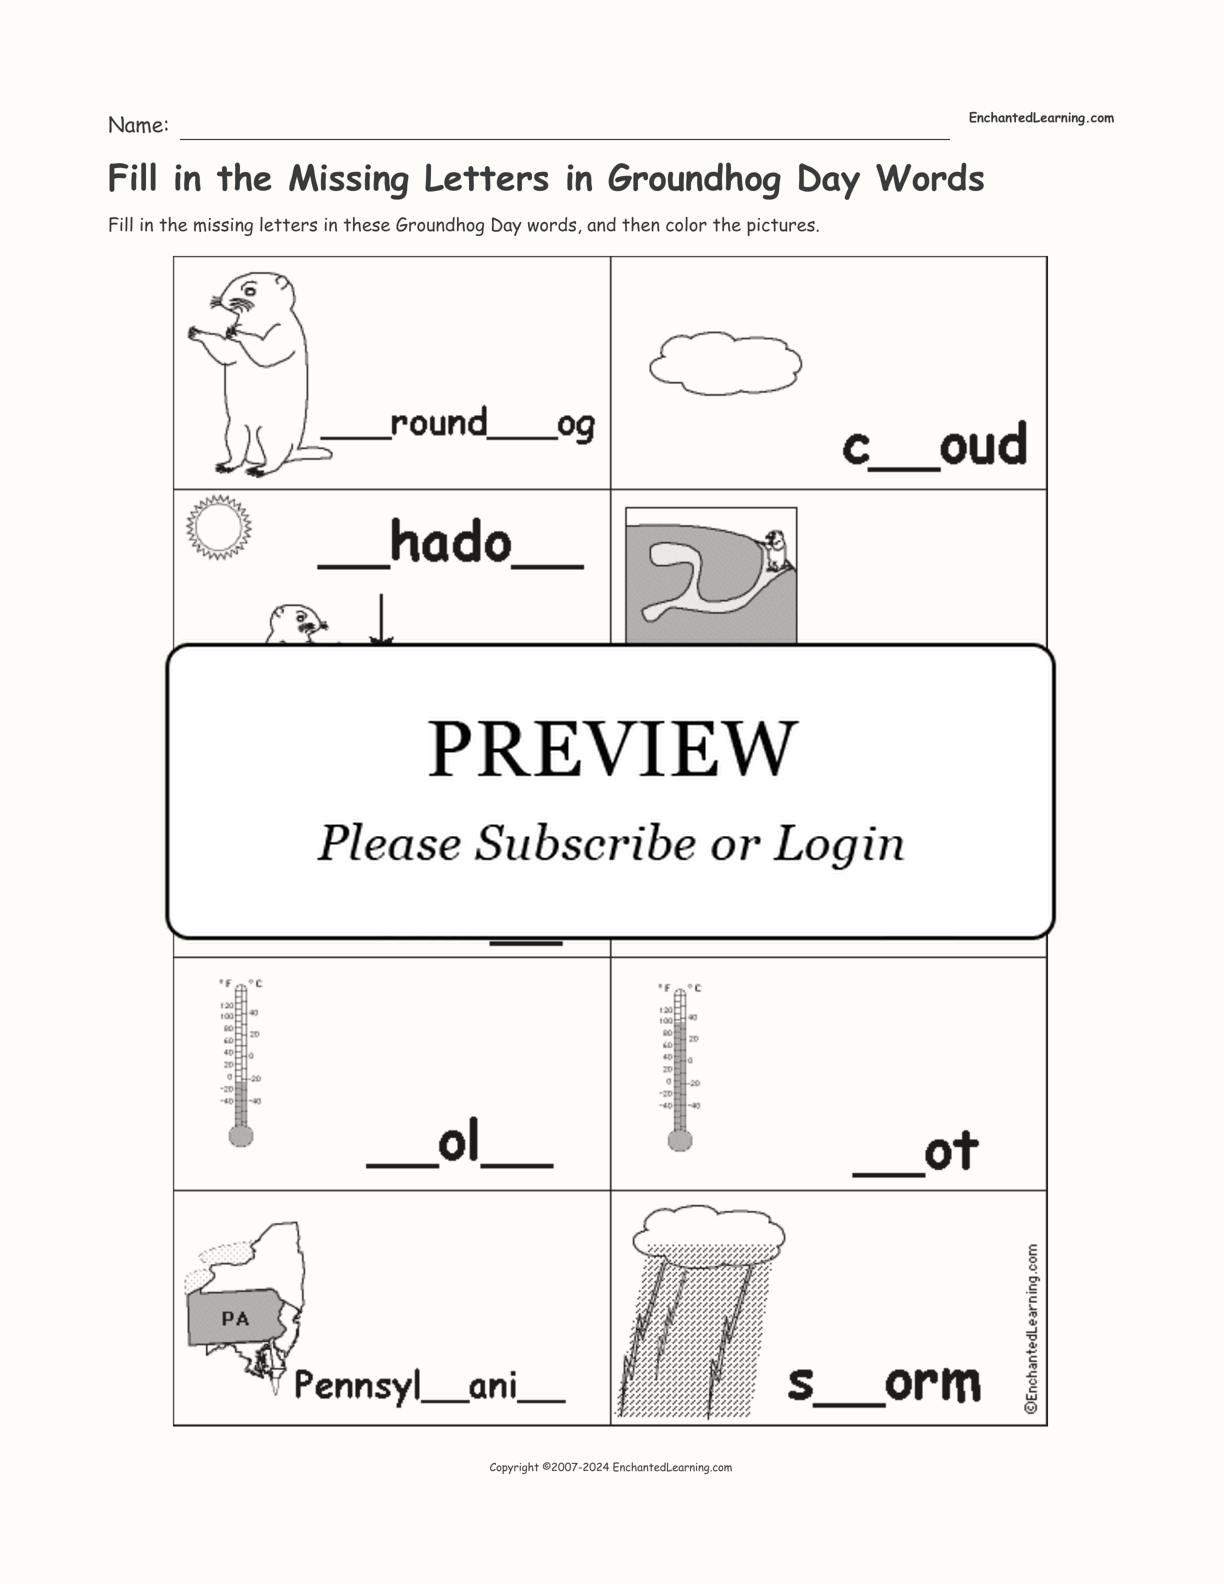 Fill in the Missing Letters in Groundhog Day Words interactive worksheet page 1